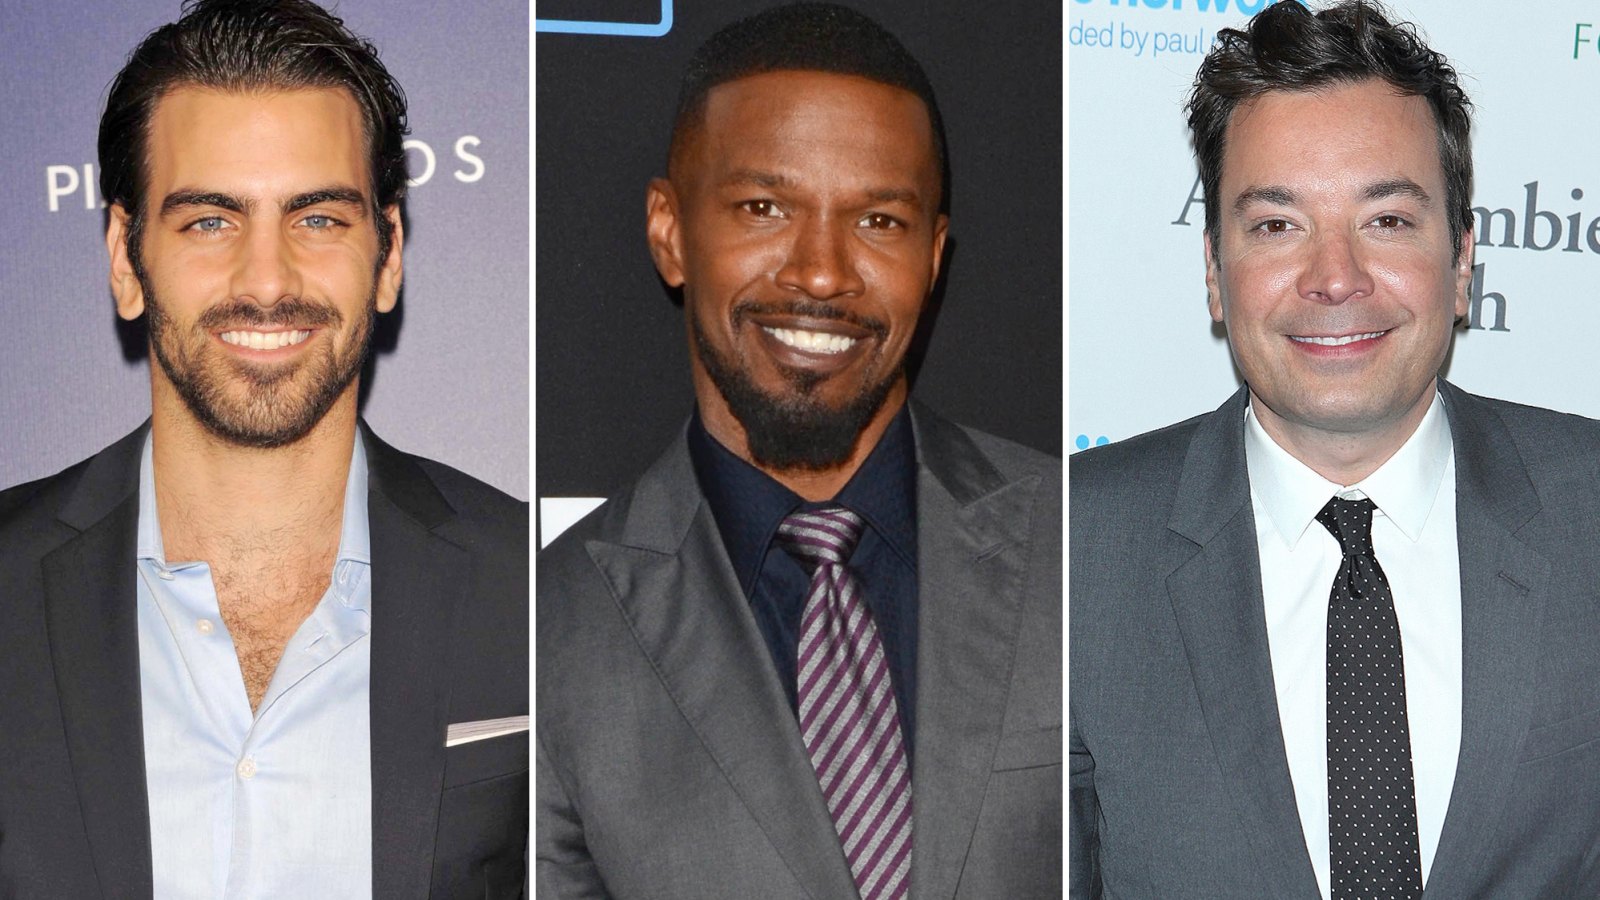 Nyle DiMarco, Jamie Foxx and Jimmy Fallon